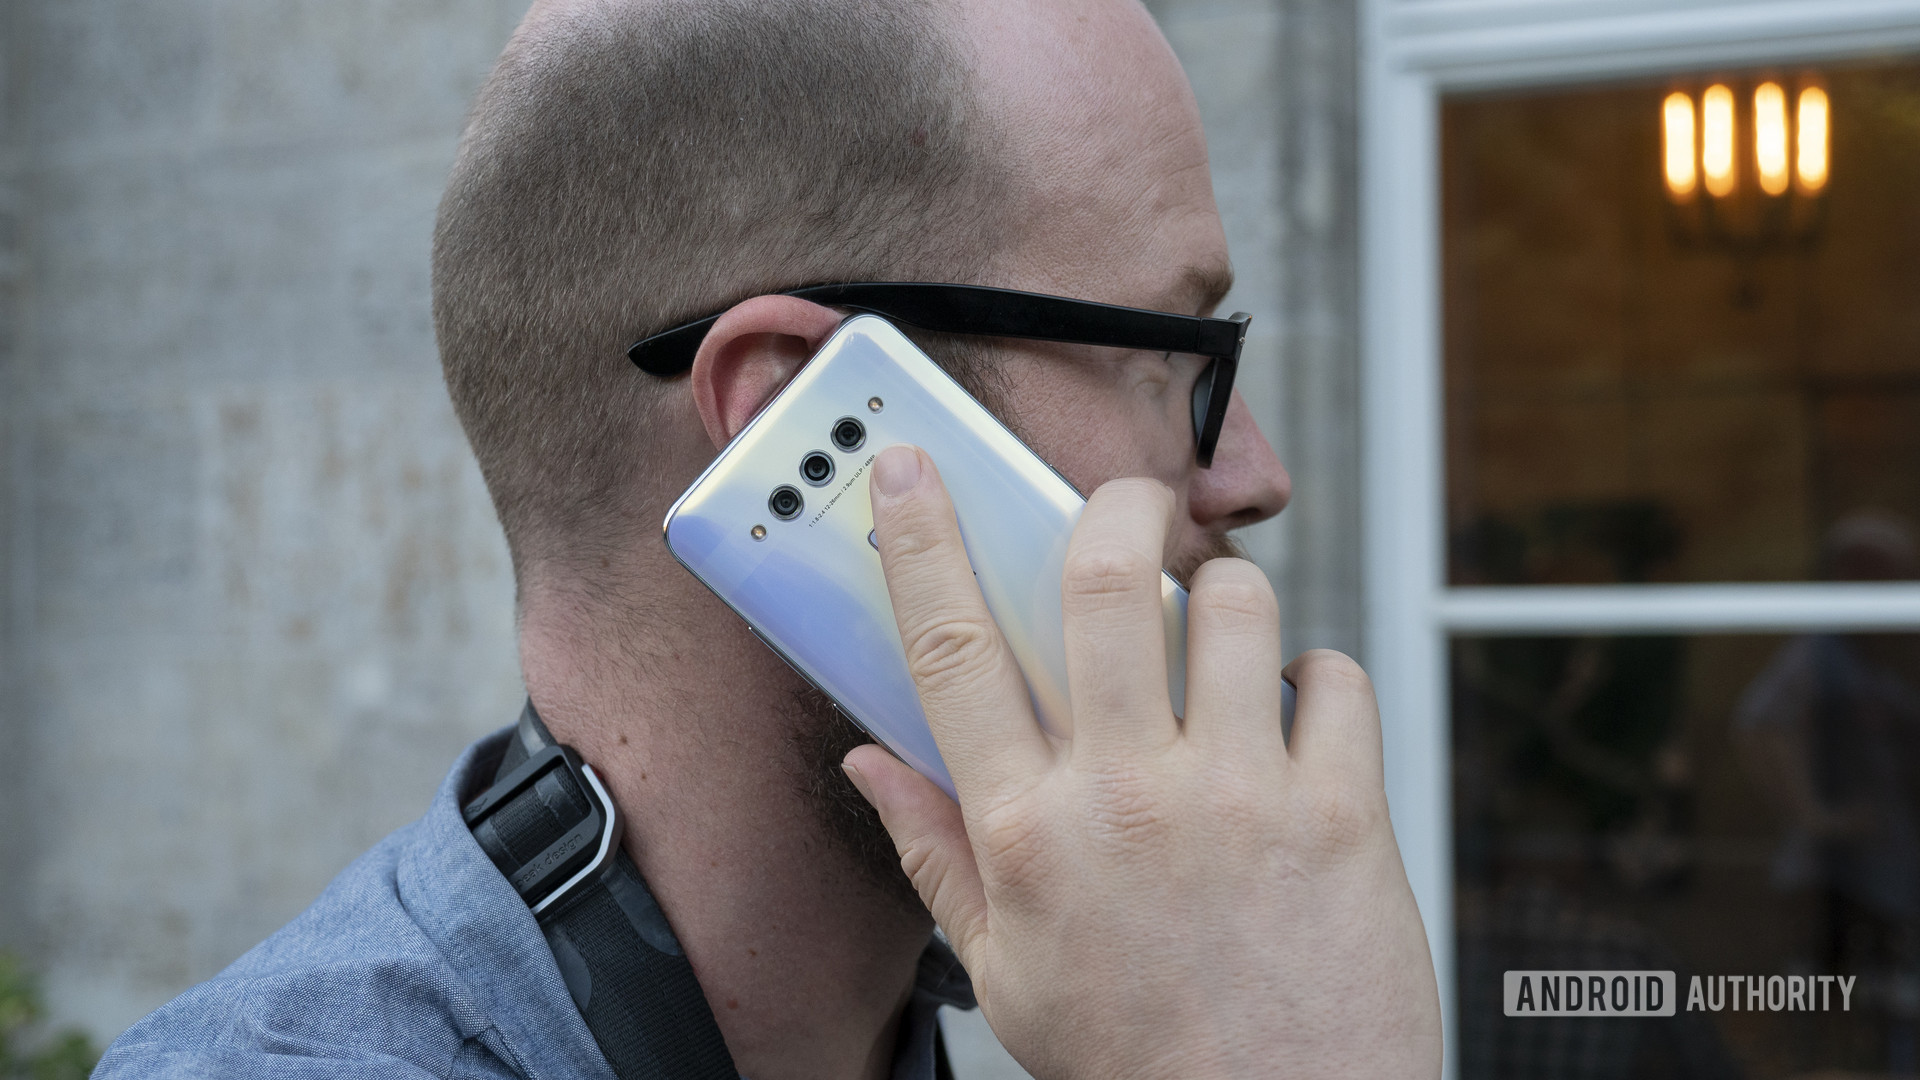 TCL Plex hands on white in hand phone call up to ear